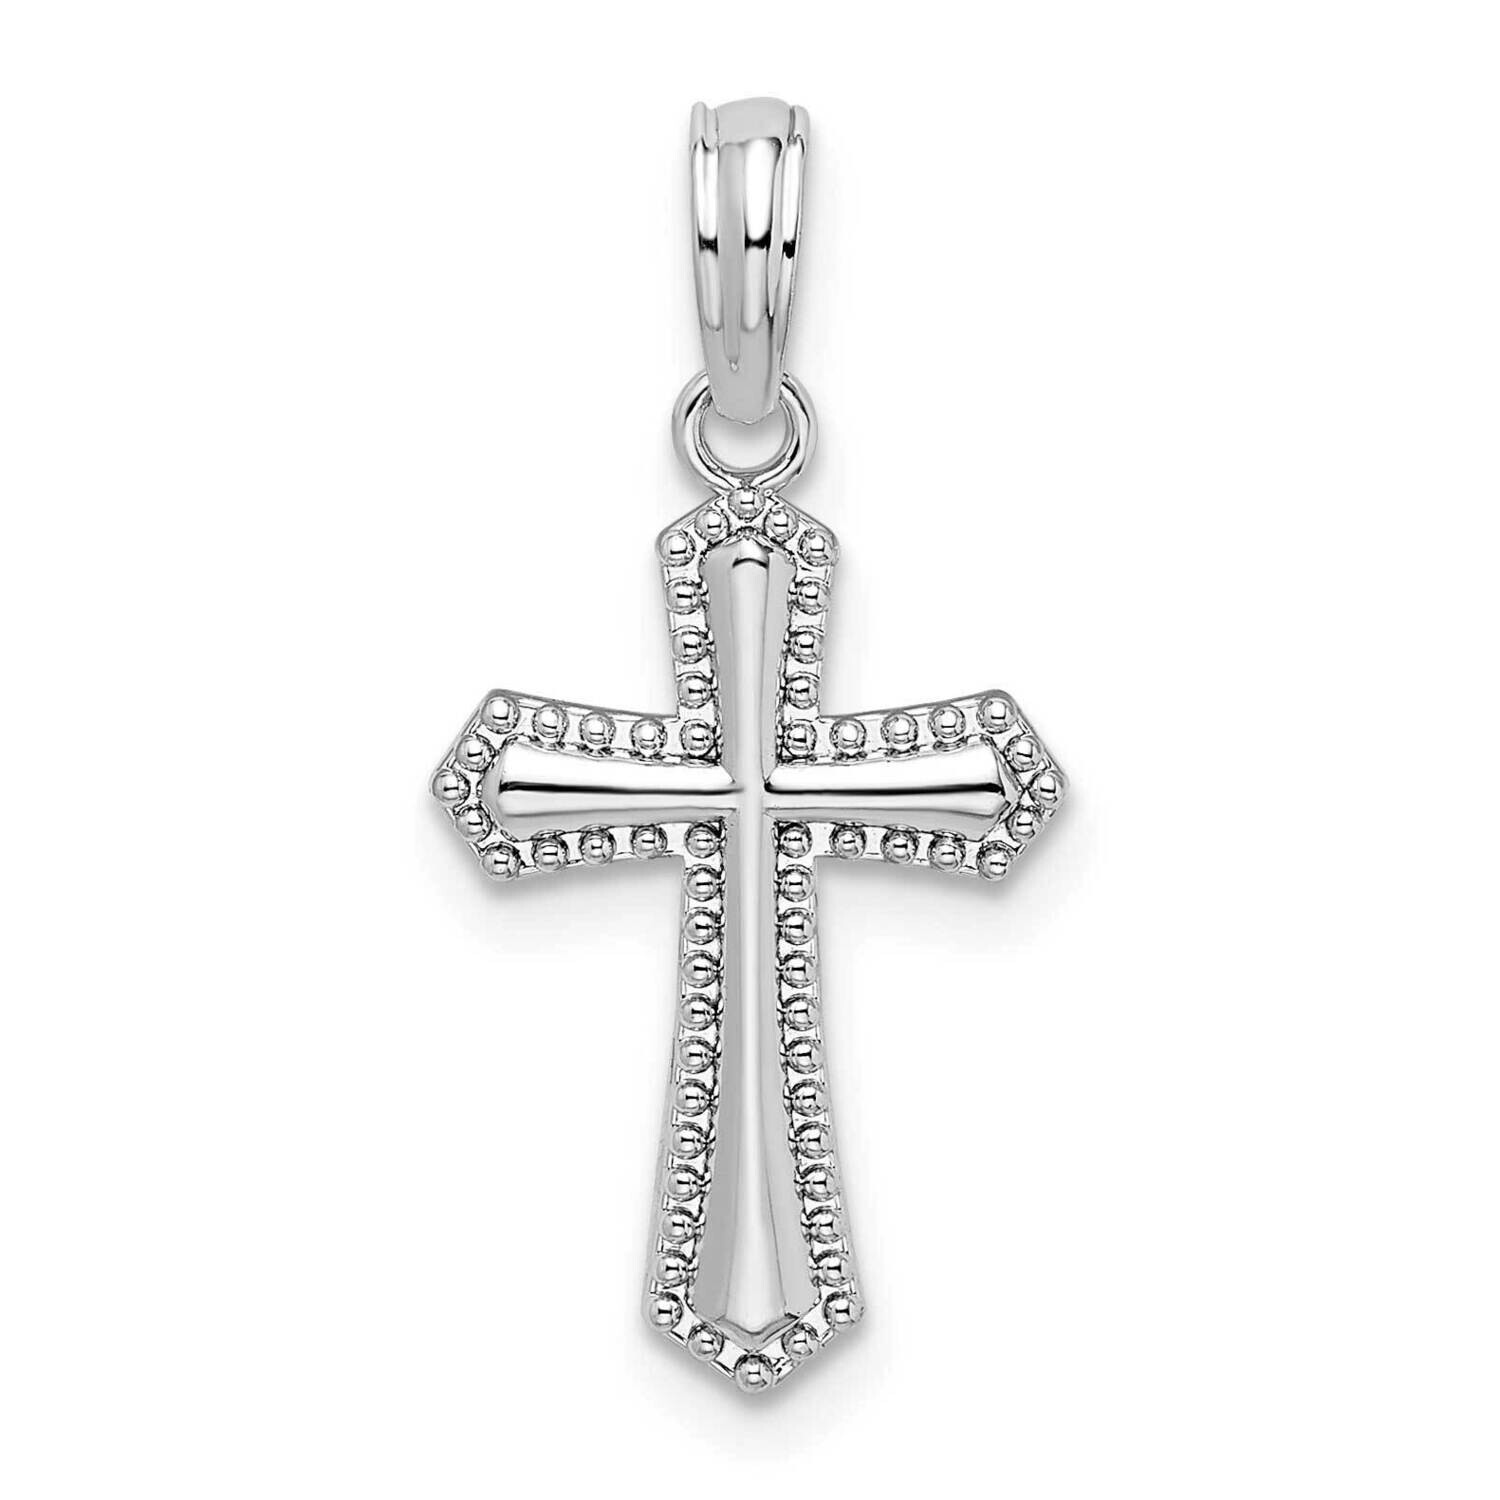 Beaded Passion Cross Pendant Sterling Silver Polished QC10350